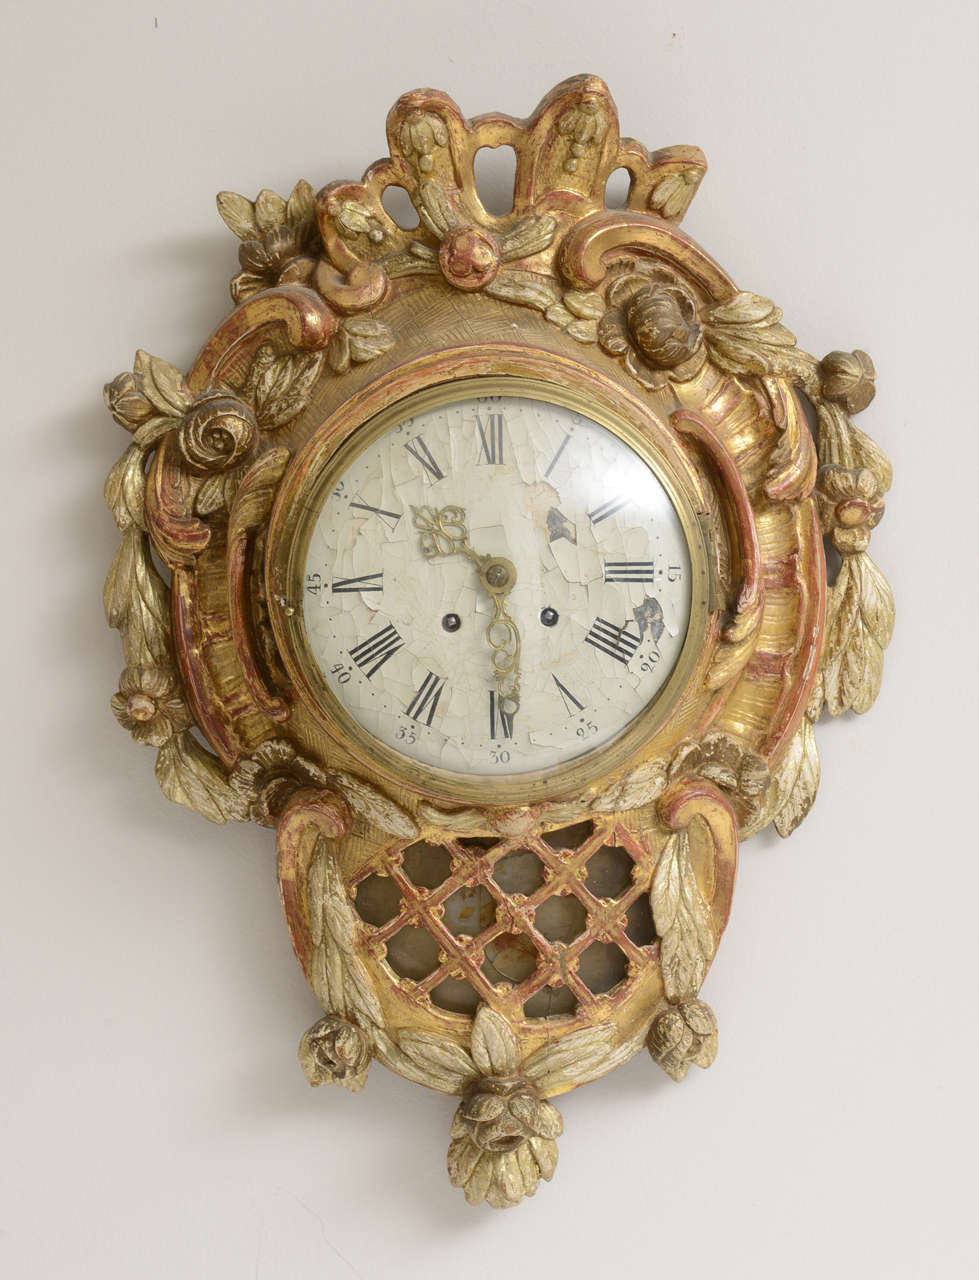 Swedish Giltwood Wall Clock from the late 18th/early 19th century. Circular face is enclosed in bellflower, lattice and foliage carved frame. The glass cover of the face opens. The background on the numerical face has some paint loss and heavy